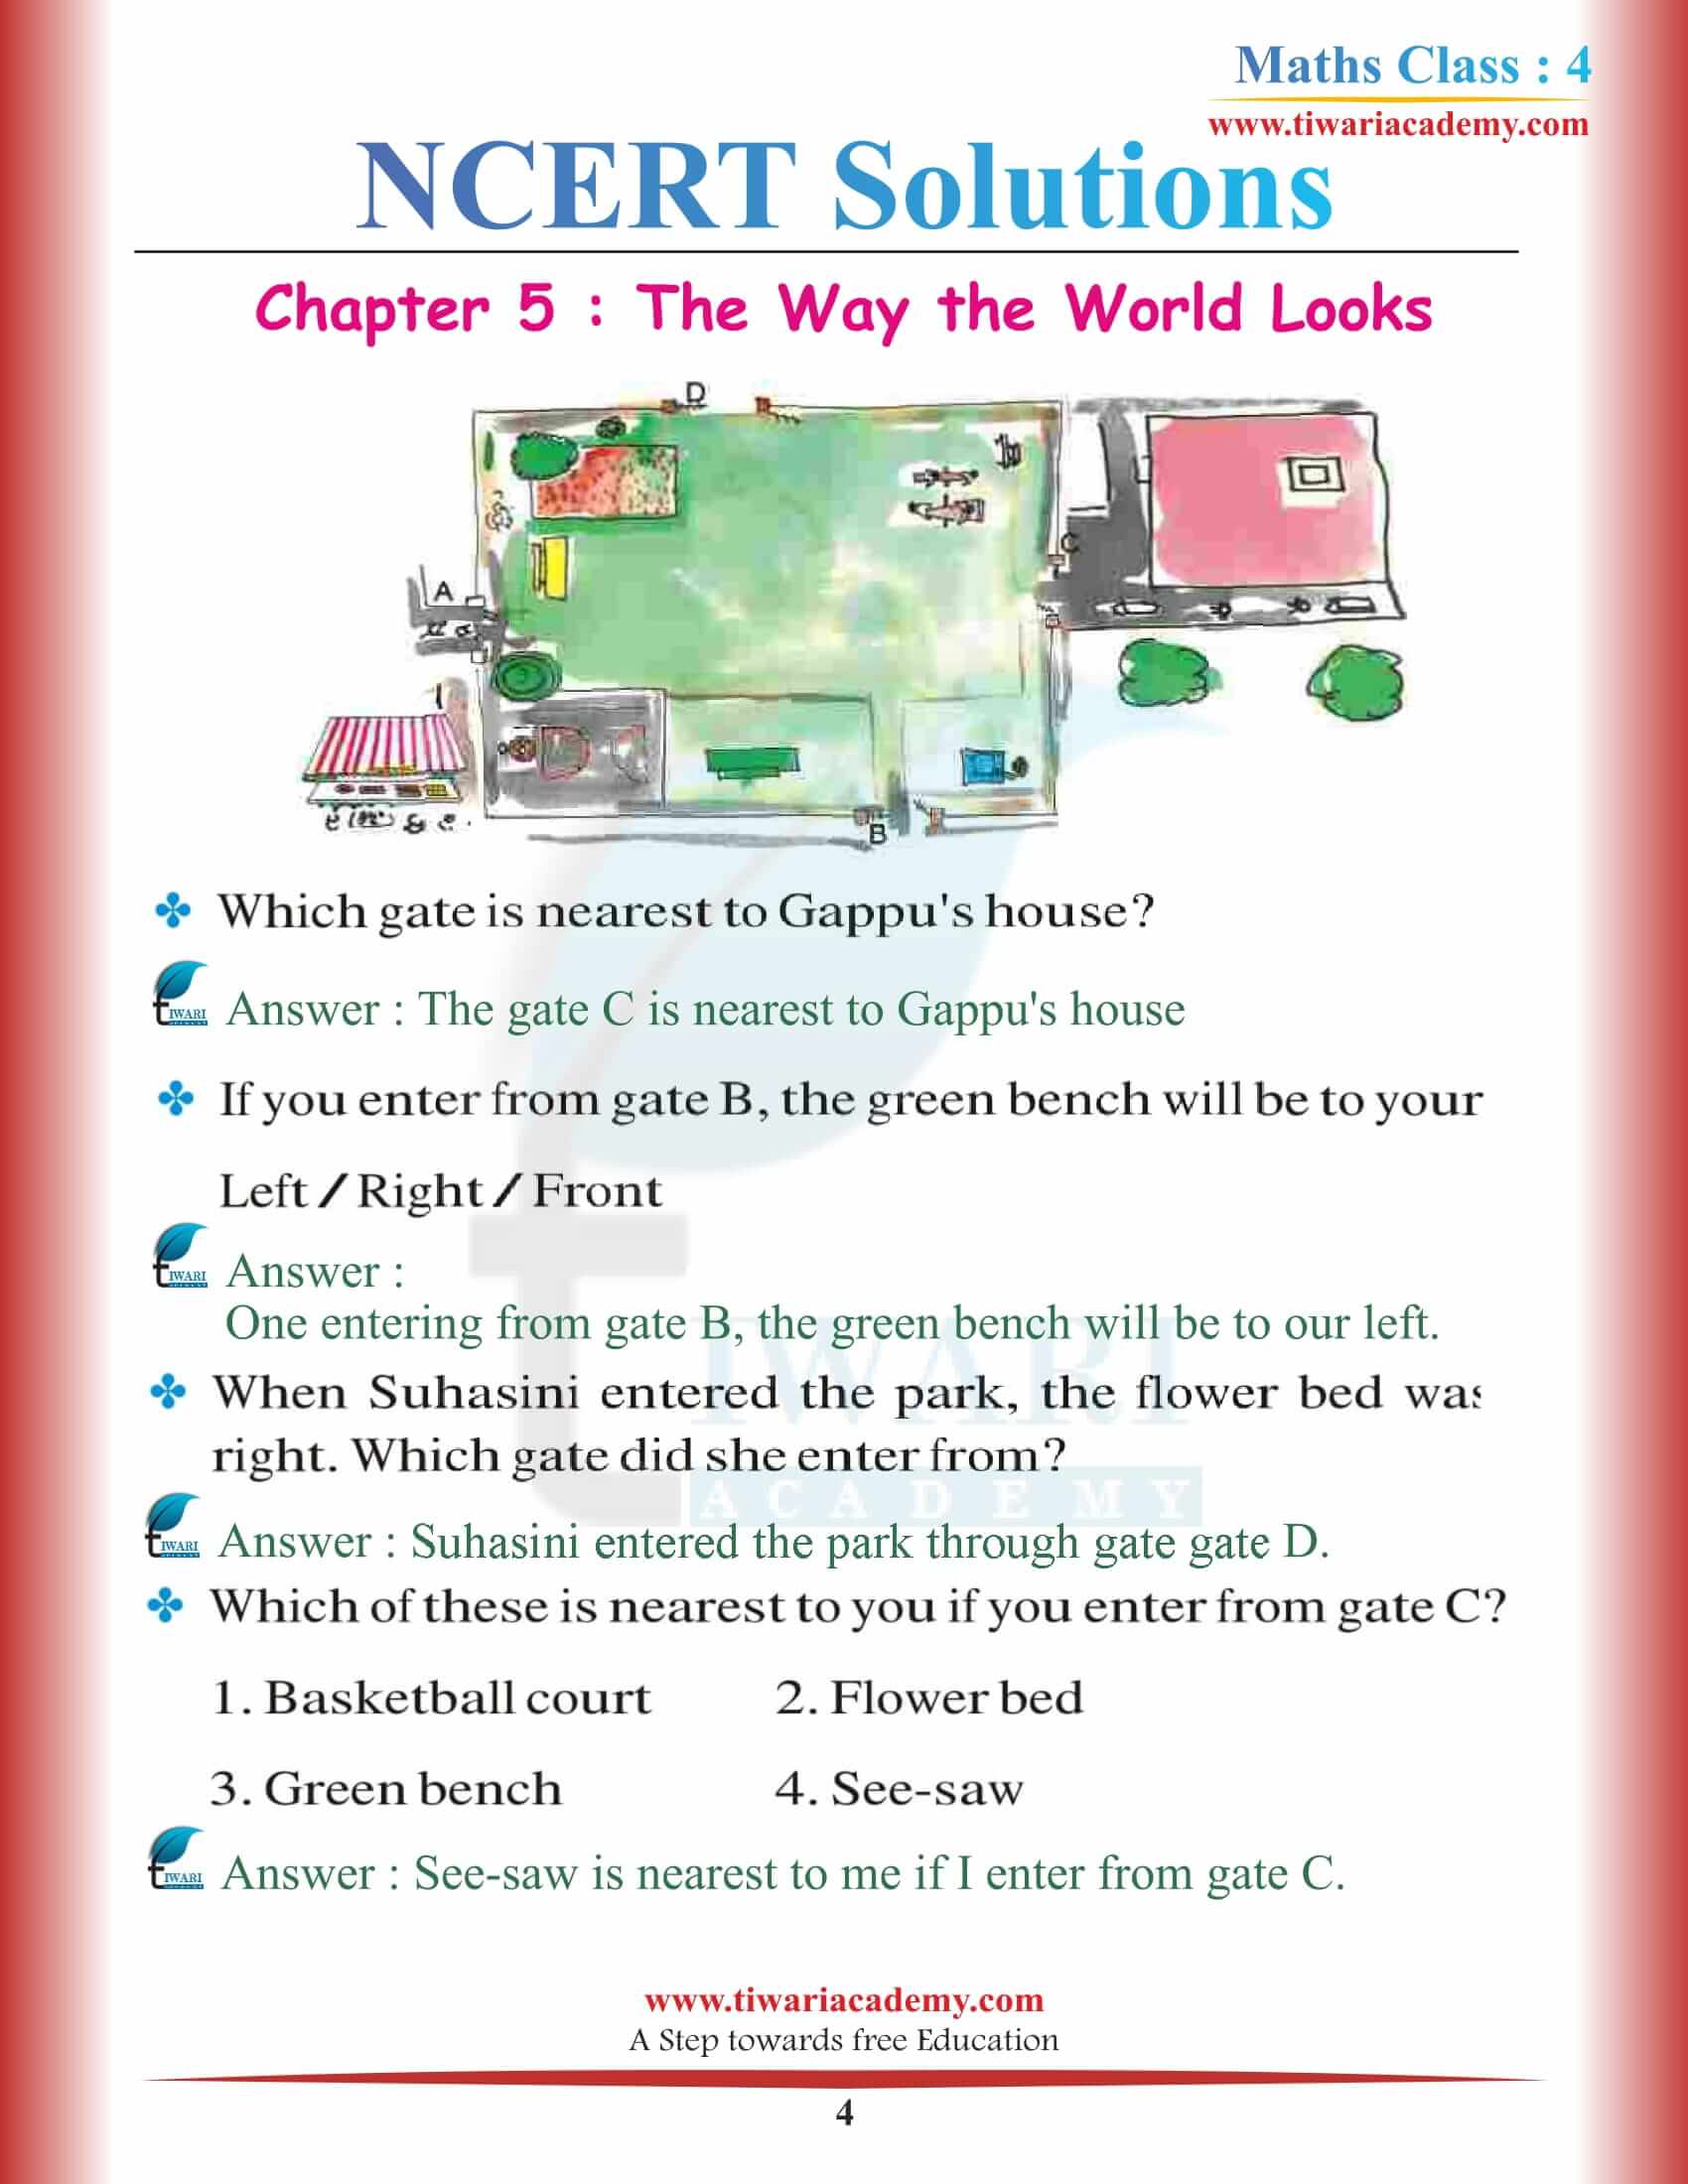 NCERT Solutions for Class 4 Maths Chapter 5 free download